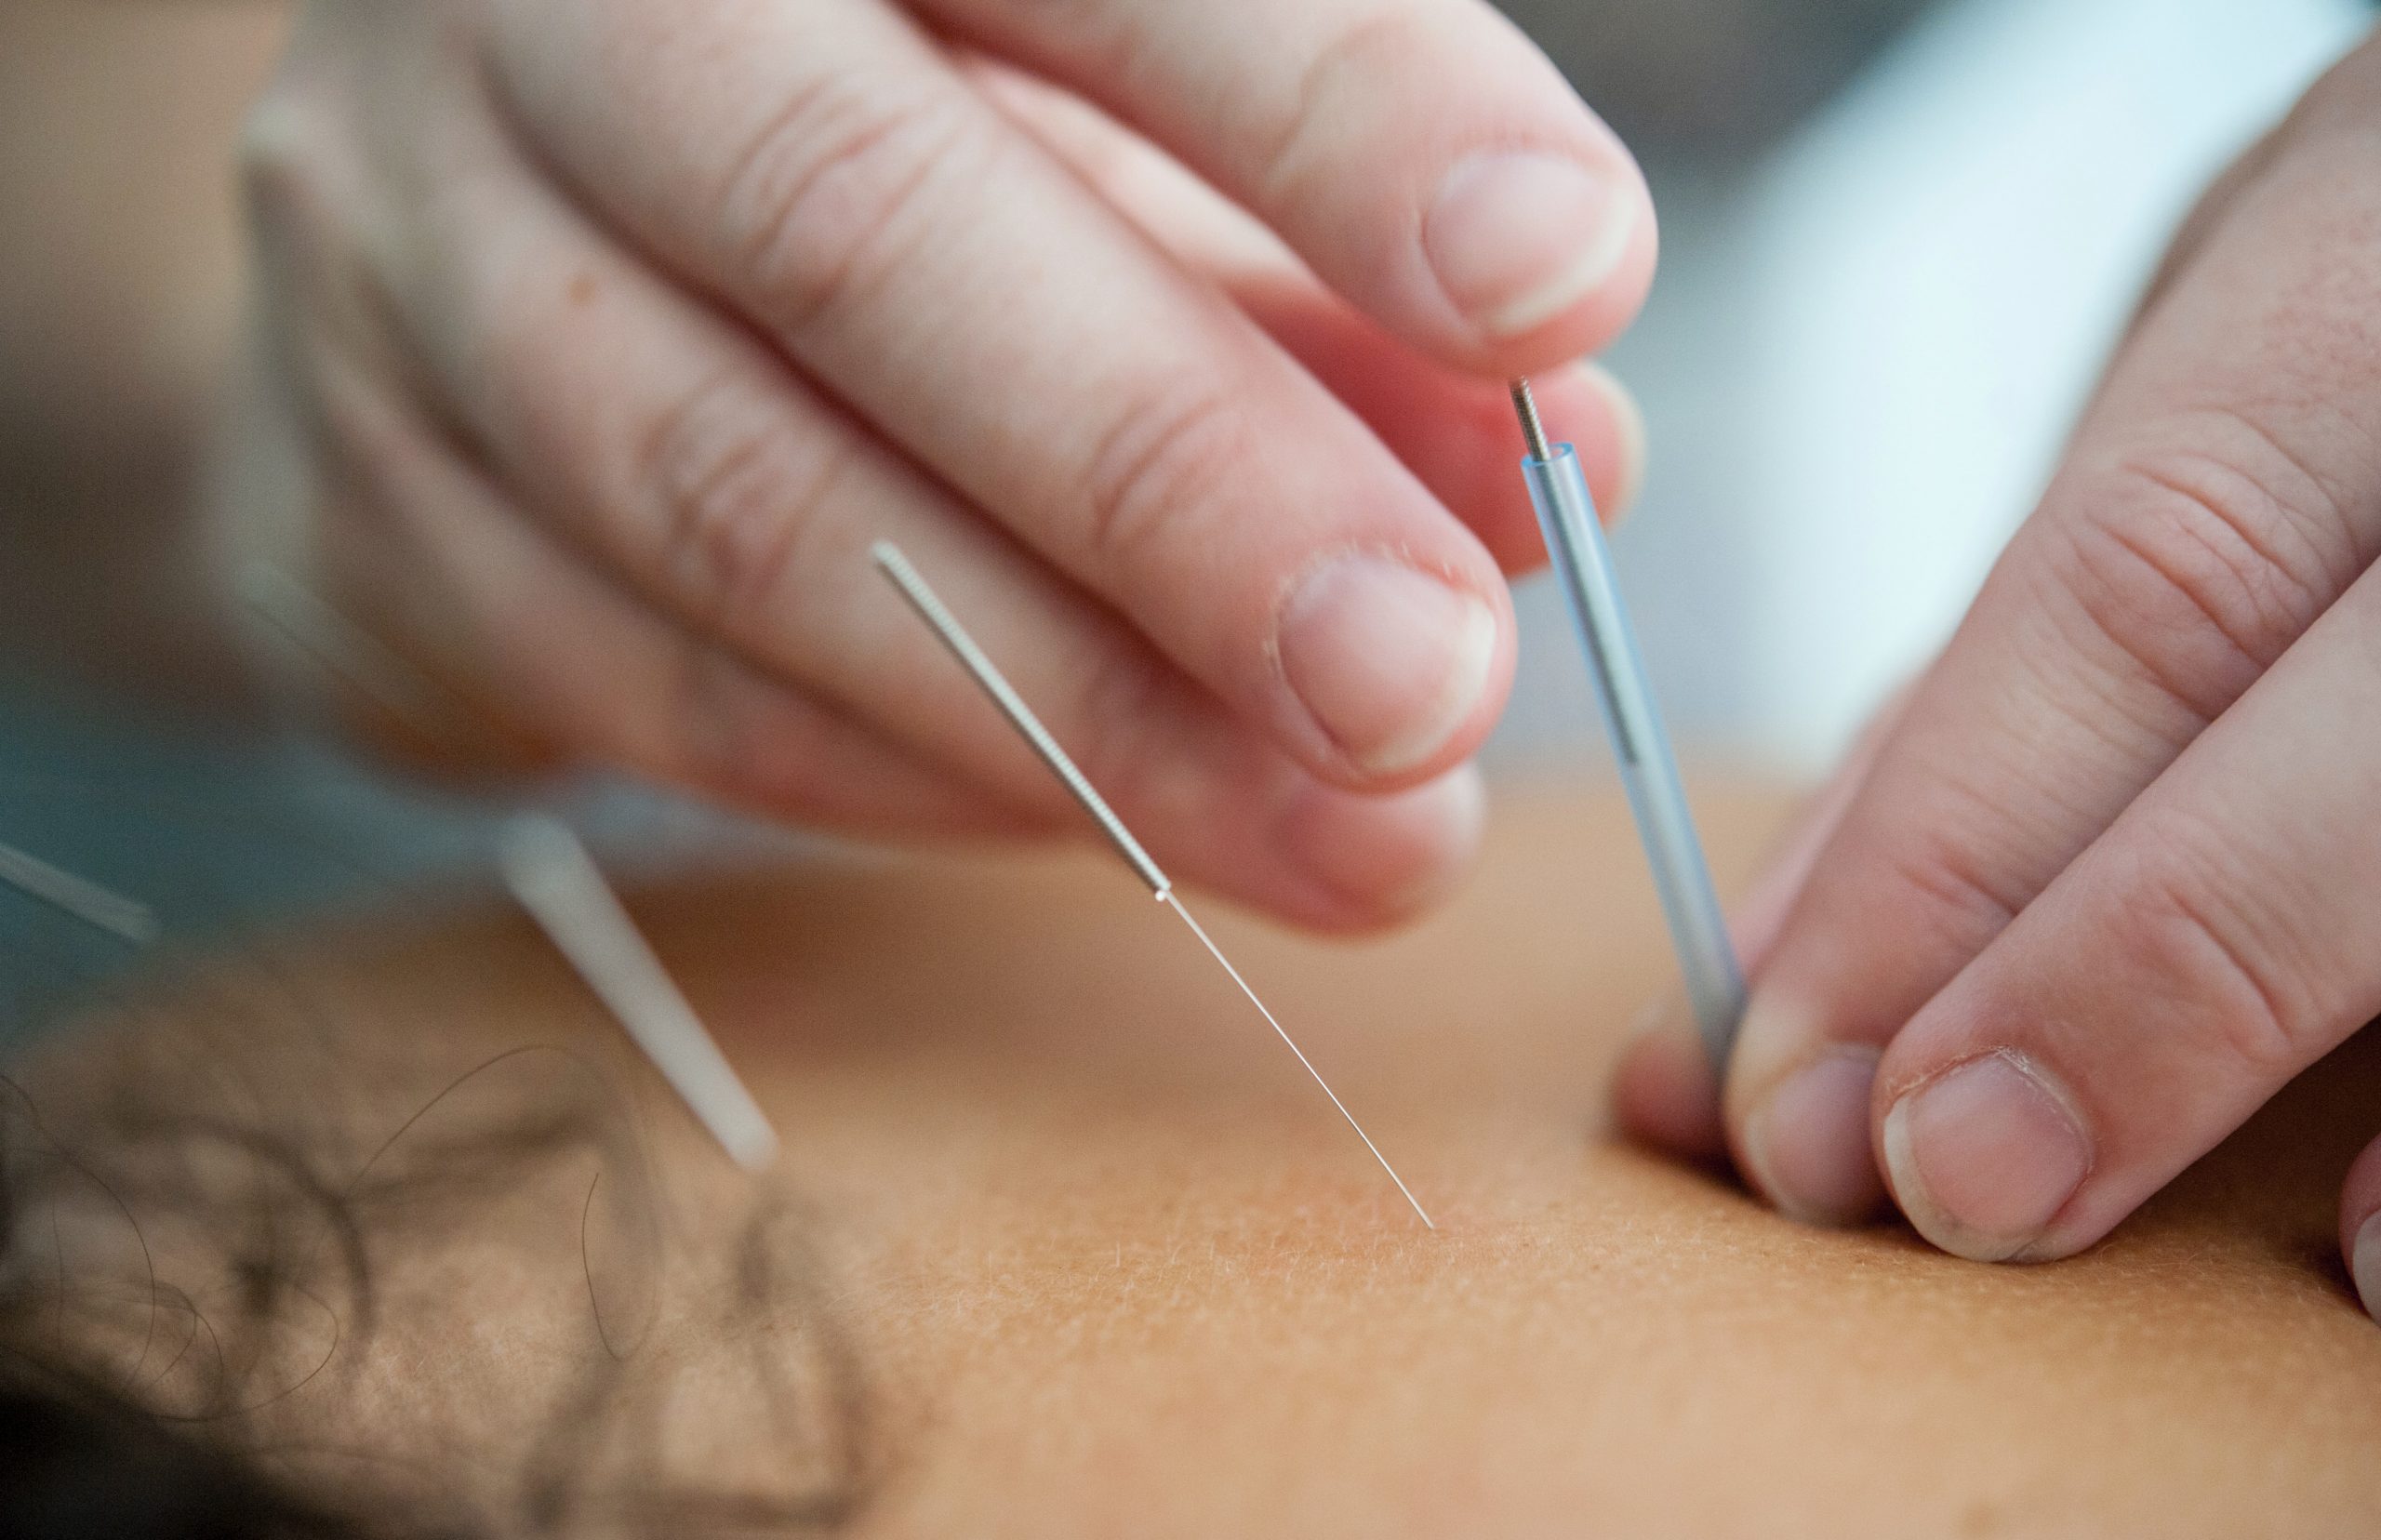 Leading The Real Way In The Study Of Acupuncture, Nutrition, And Chinese Natural Medicine